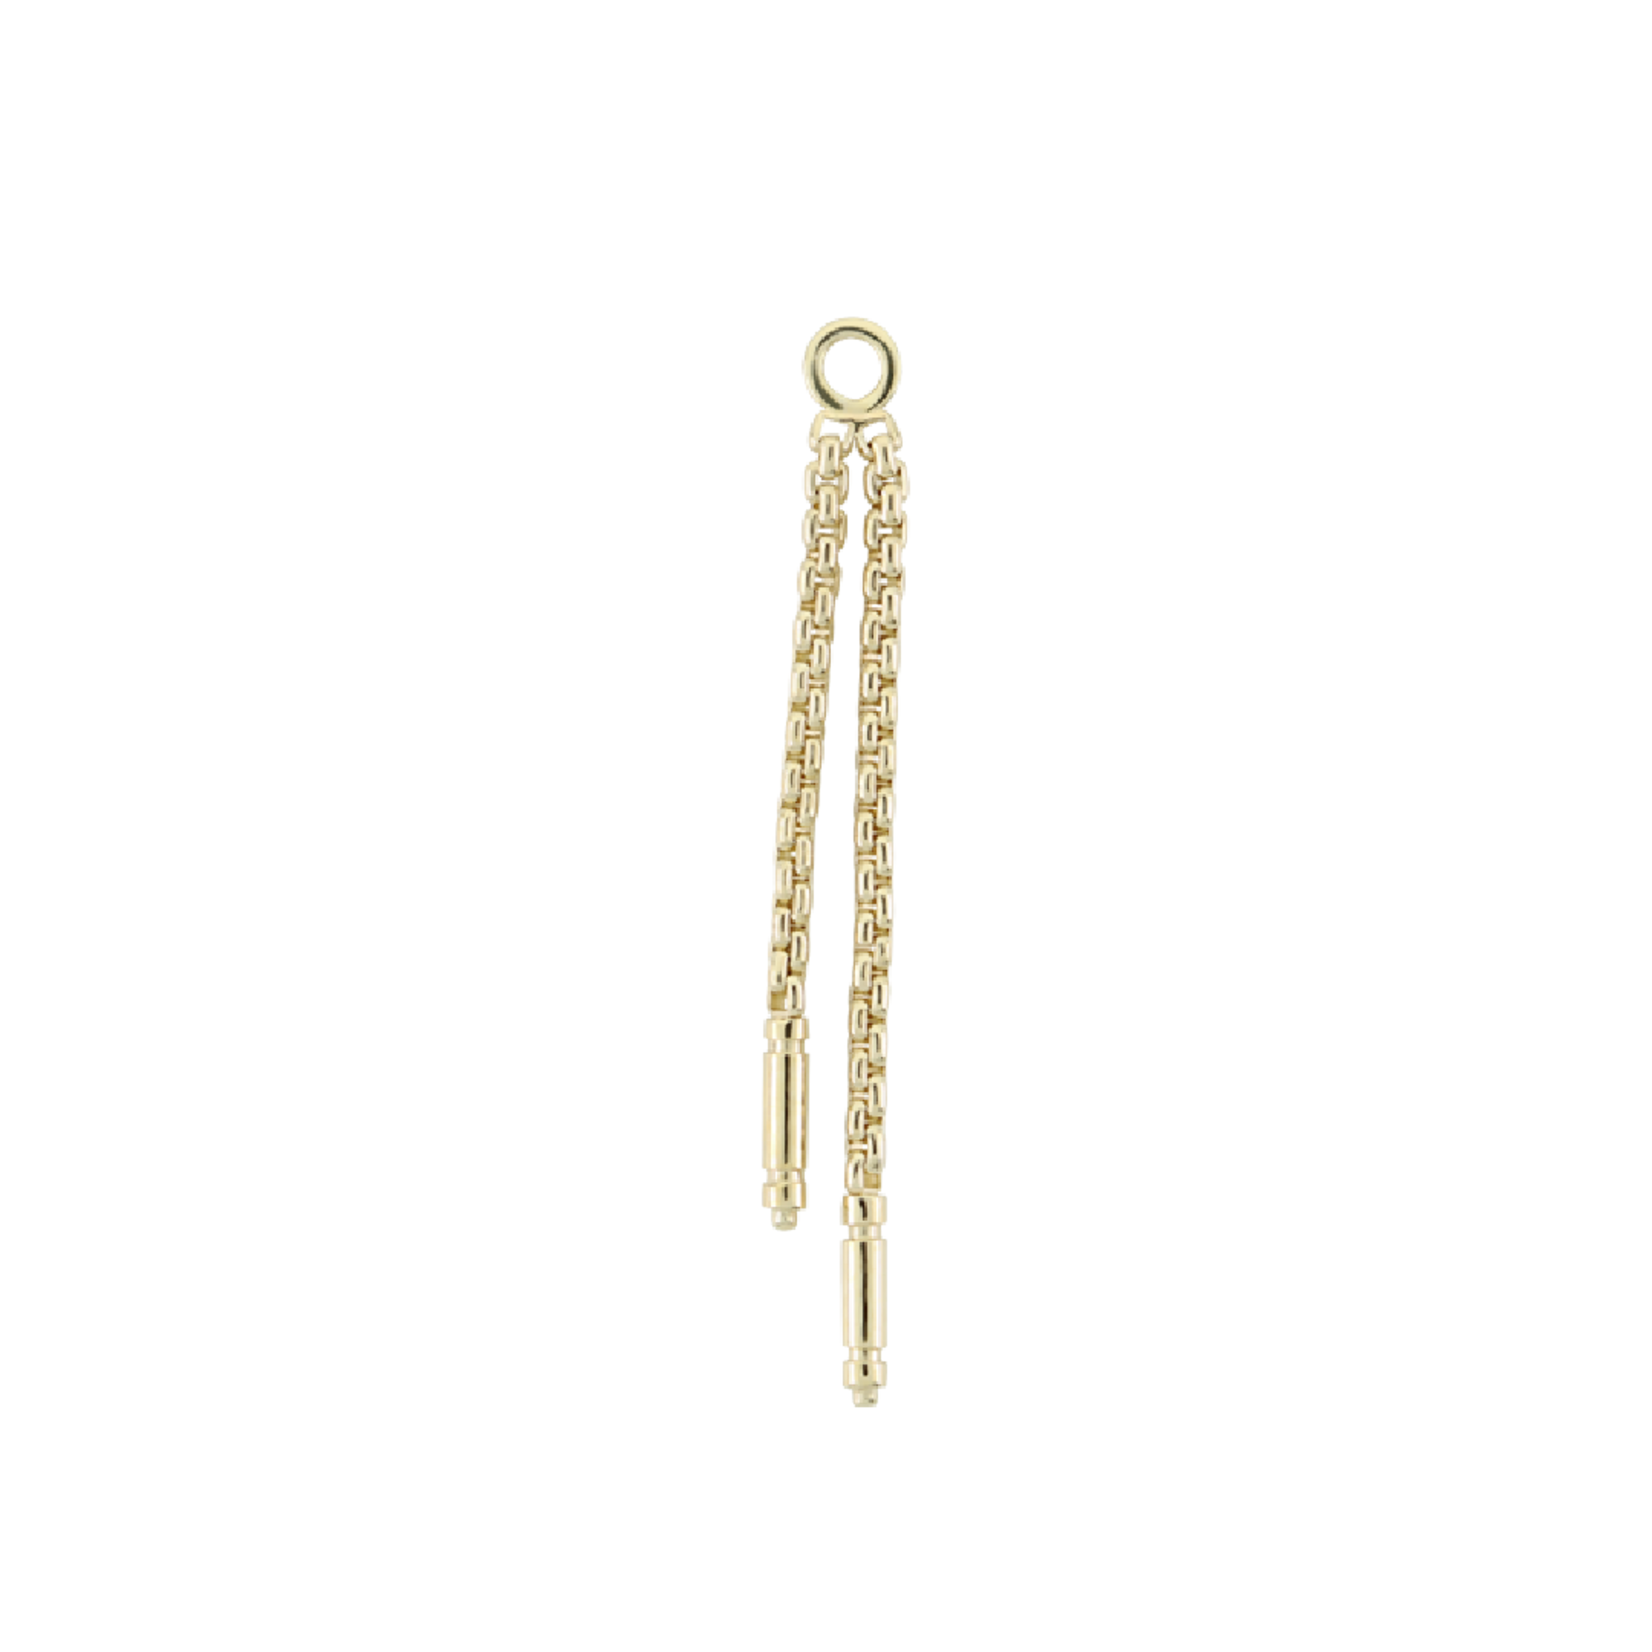 LeRoi LeRoi solid 14 karat gold "Meander II" chain with double dangle. 16.1mm length on 16g jump ring